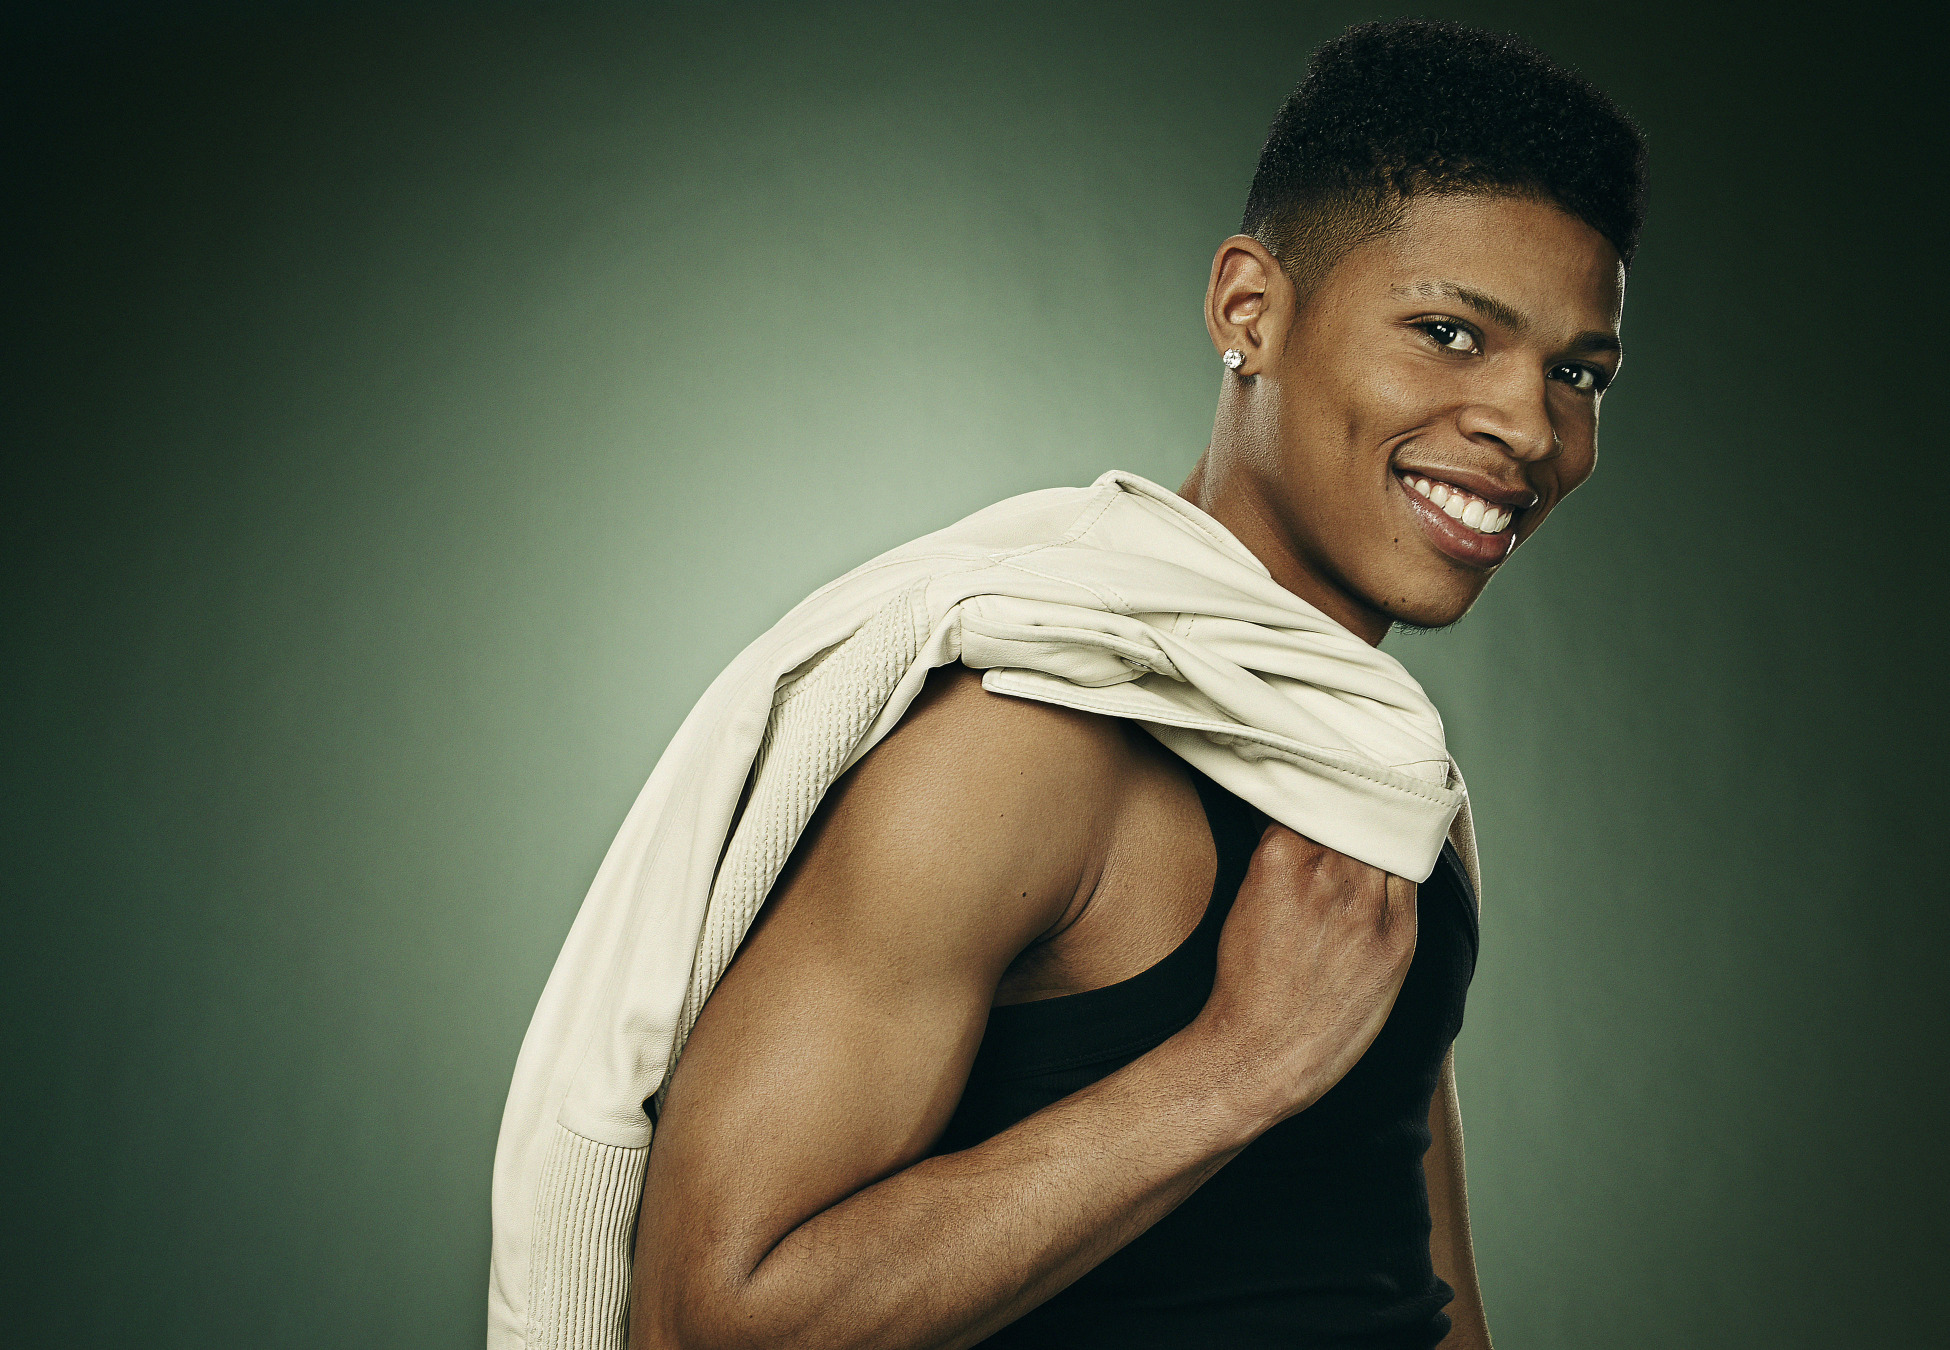 Hakeem Lyon Empire Will Join The Schedule In On Fox